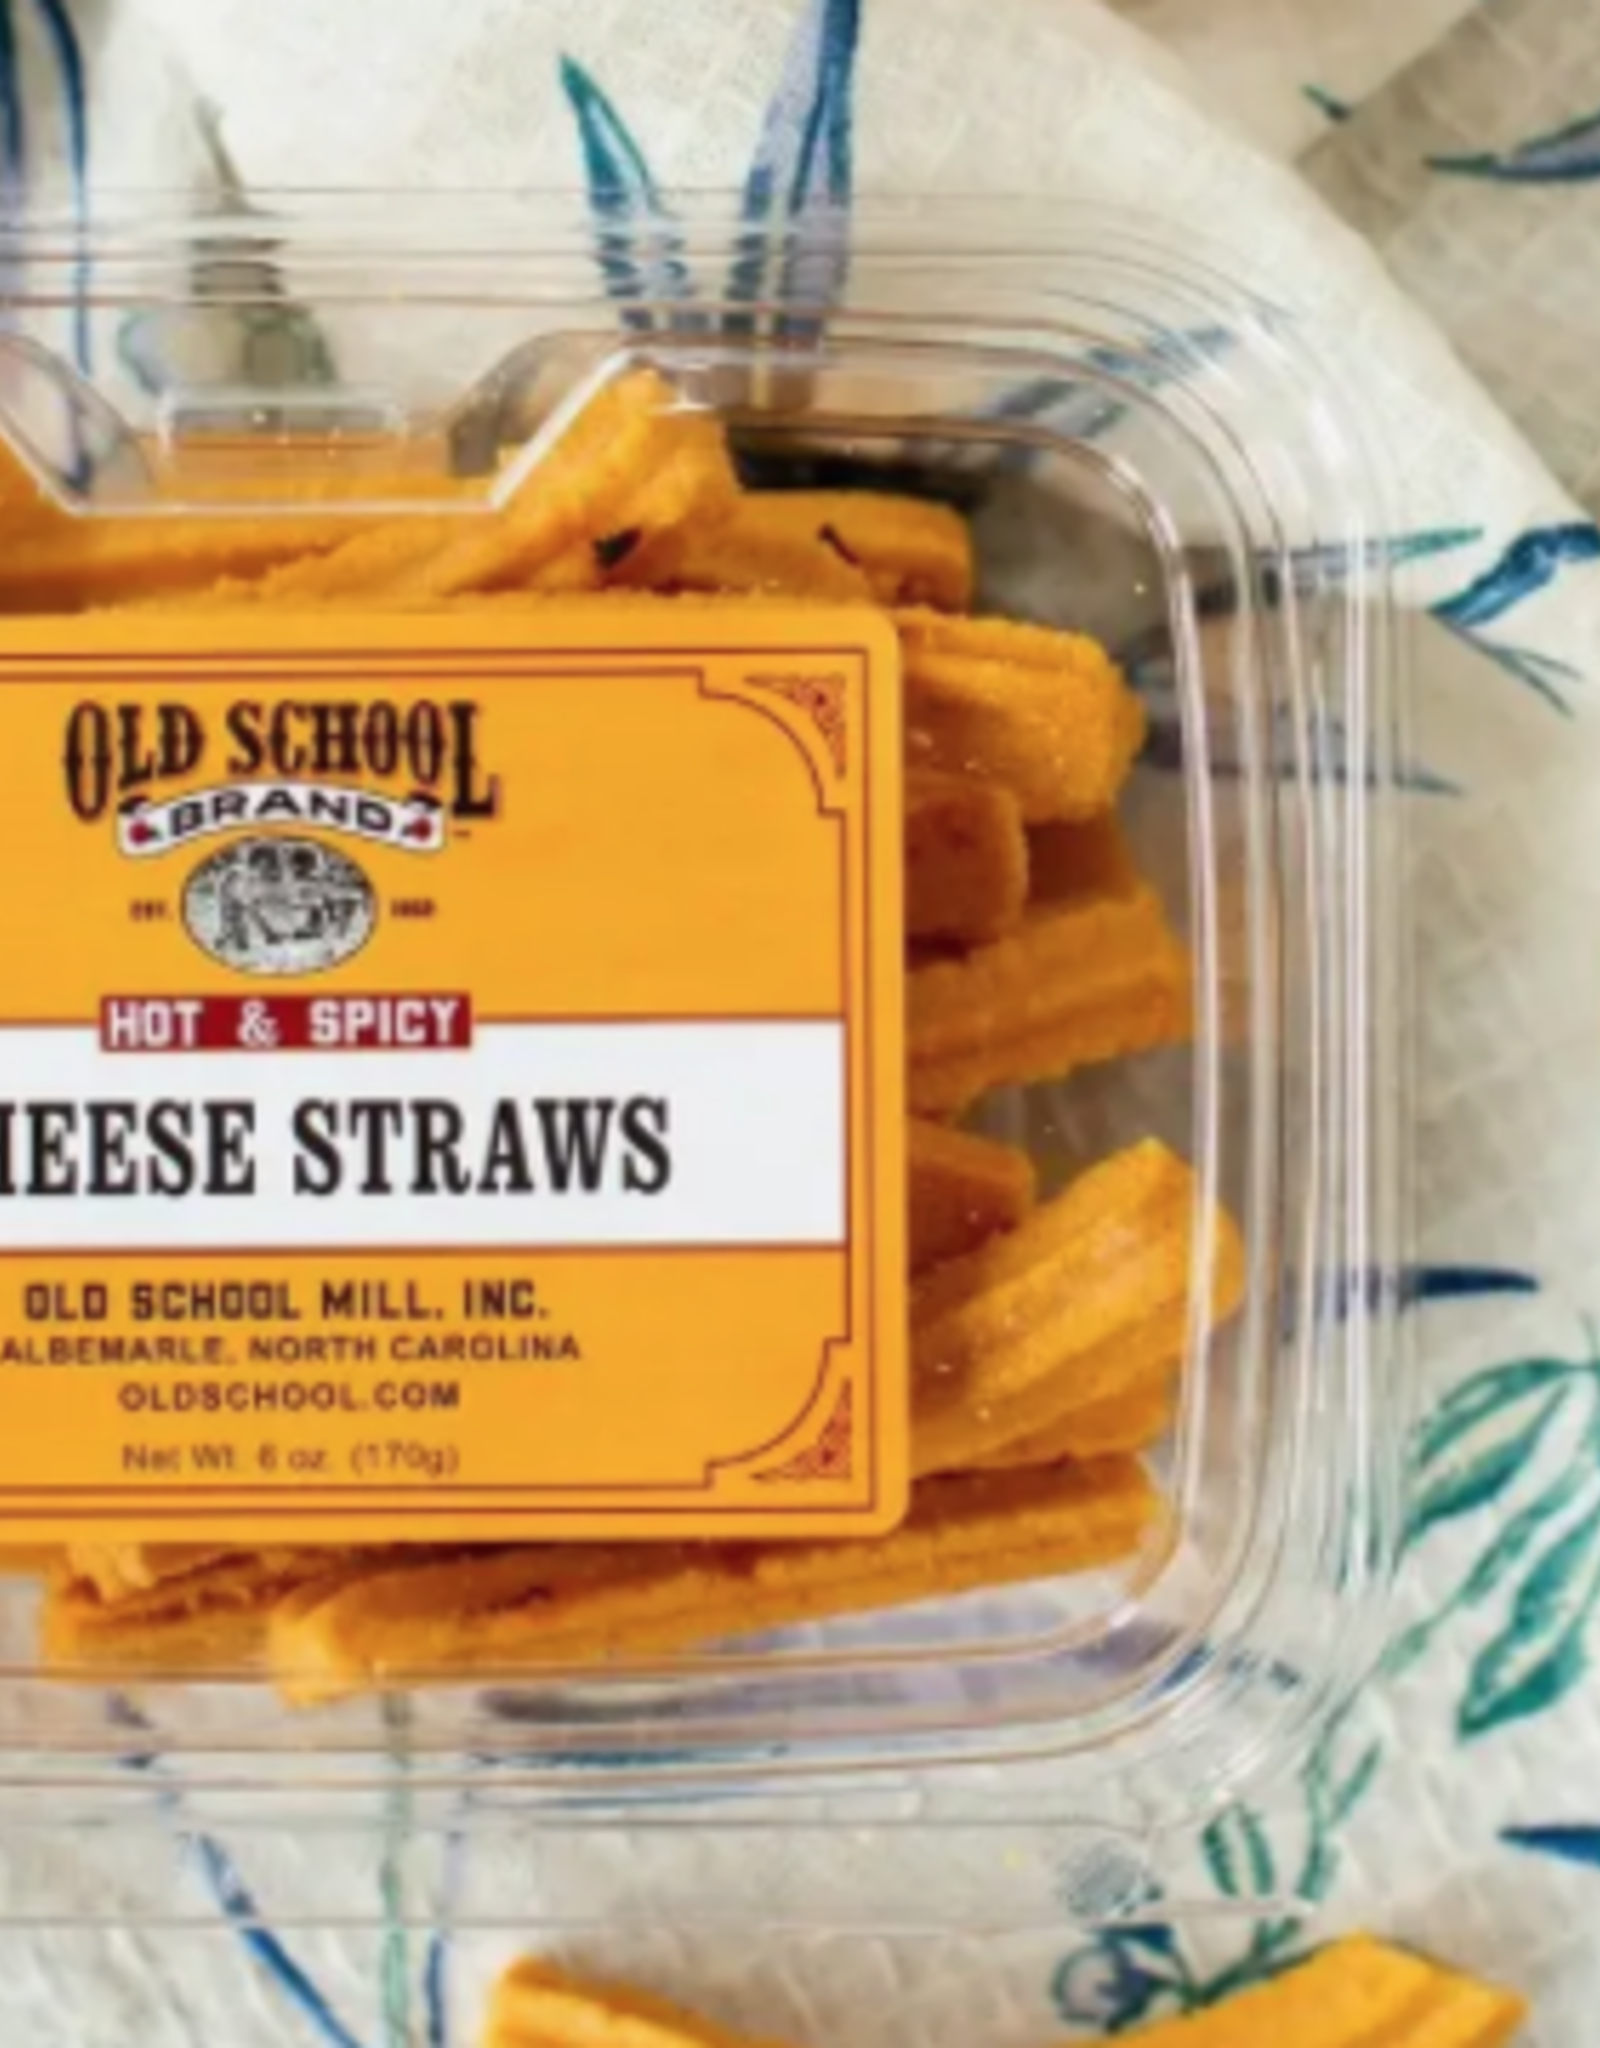 Old School: Hot & Spicy Cheese Straws 6 oz